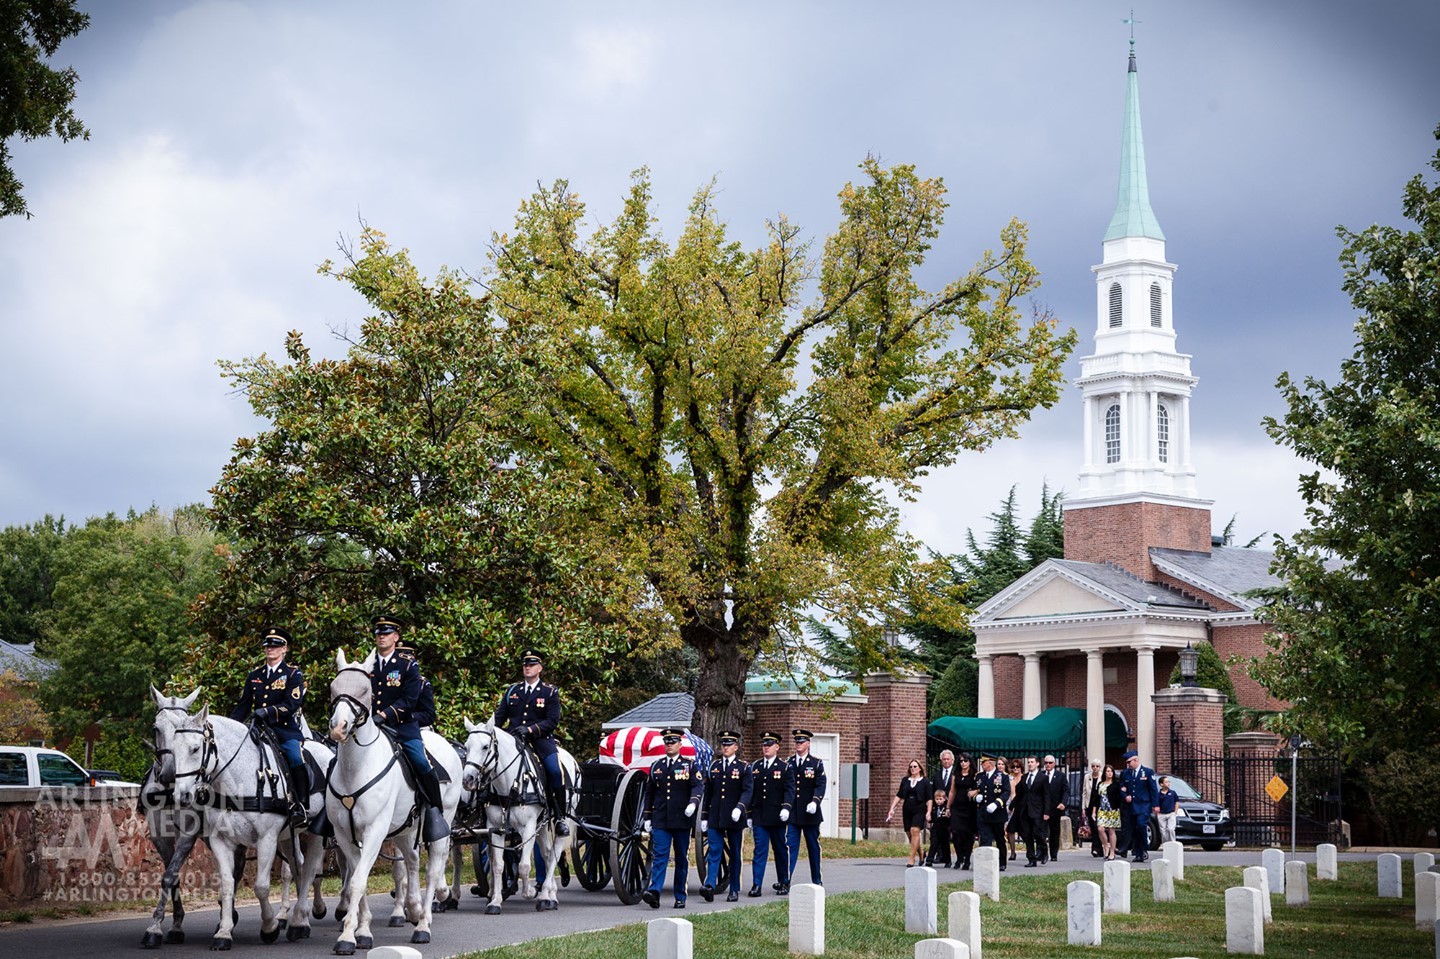 A US Army Full Honors service departs the Old Post Chapel at Fort Myer and enters Arlington National Cemetery on the way to the gravesite.

The Old Post Chapel on Fort Myer is adjacent to Arlington National Cemetery and is the site of many military funerals. The chapel is striking in its simplicity and its unique stained glassed windows which add to its beauty. The windows were donated by the chaplain corps of the different branches of the services -- with depictions from each branch. 

While services take place in the chapel, the gravesite can be up to 2 miles away in the cemetery itself.  After the church service, the casket is placed on a caisson pulled by six horses. Behind the caisson, family and friends may choose to walk or drive their car to the burial site.  This scene is shown here, as captured by our @arlingtonmedia team